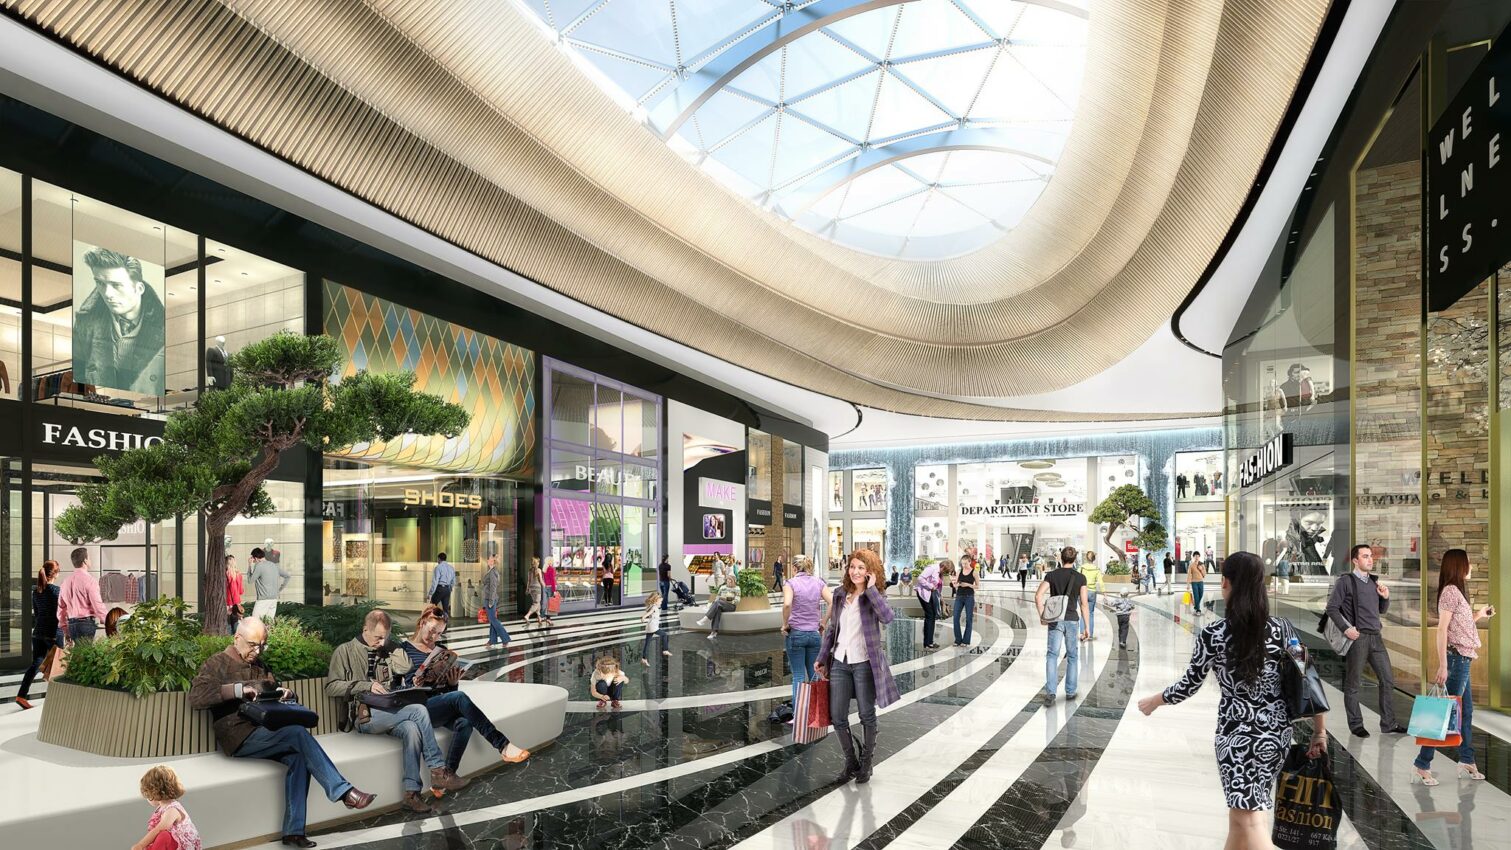 The Mall of the Netherlands will really open this fall and that's what it means